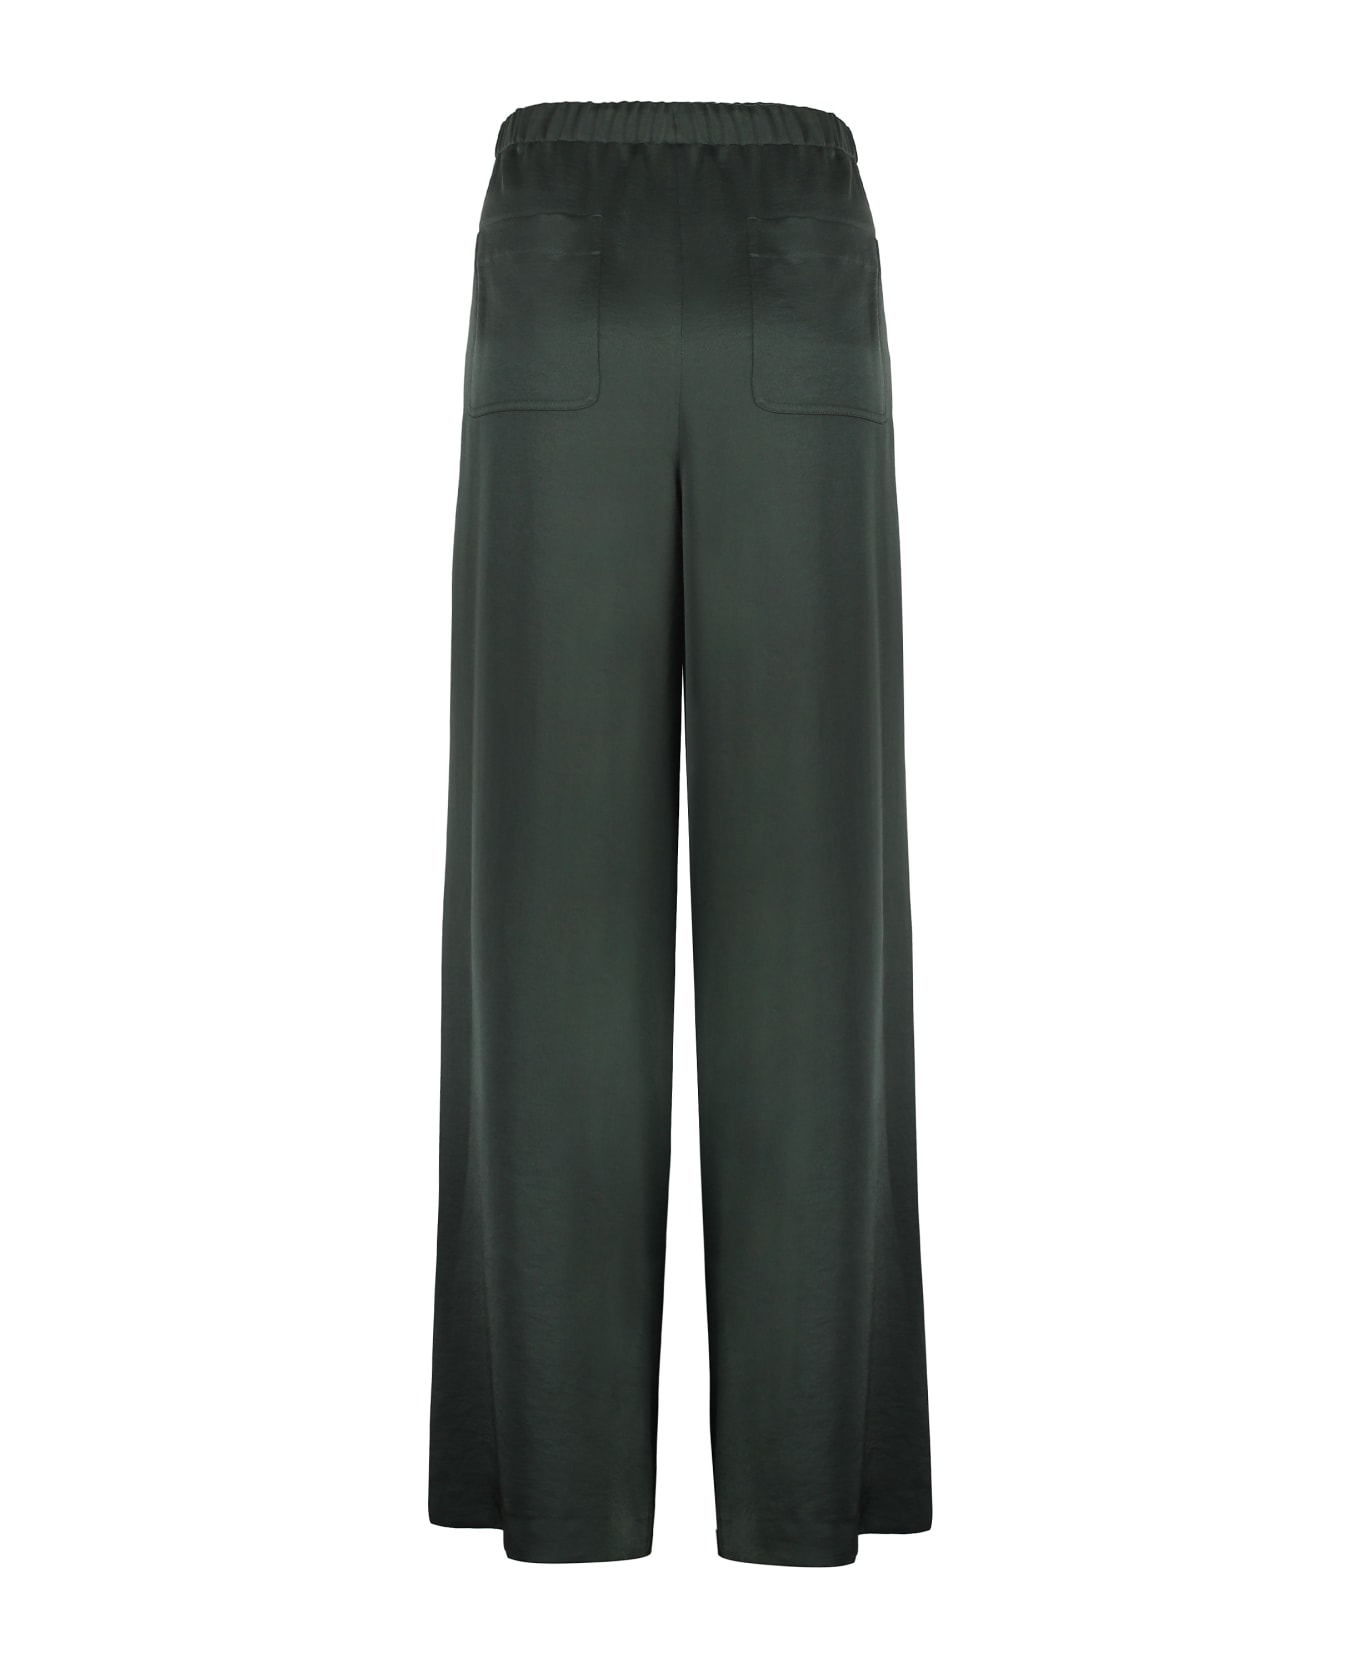 Vince Satin Trousers - Npi Night Pine ボトムス